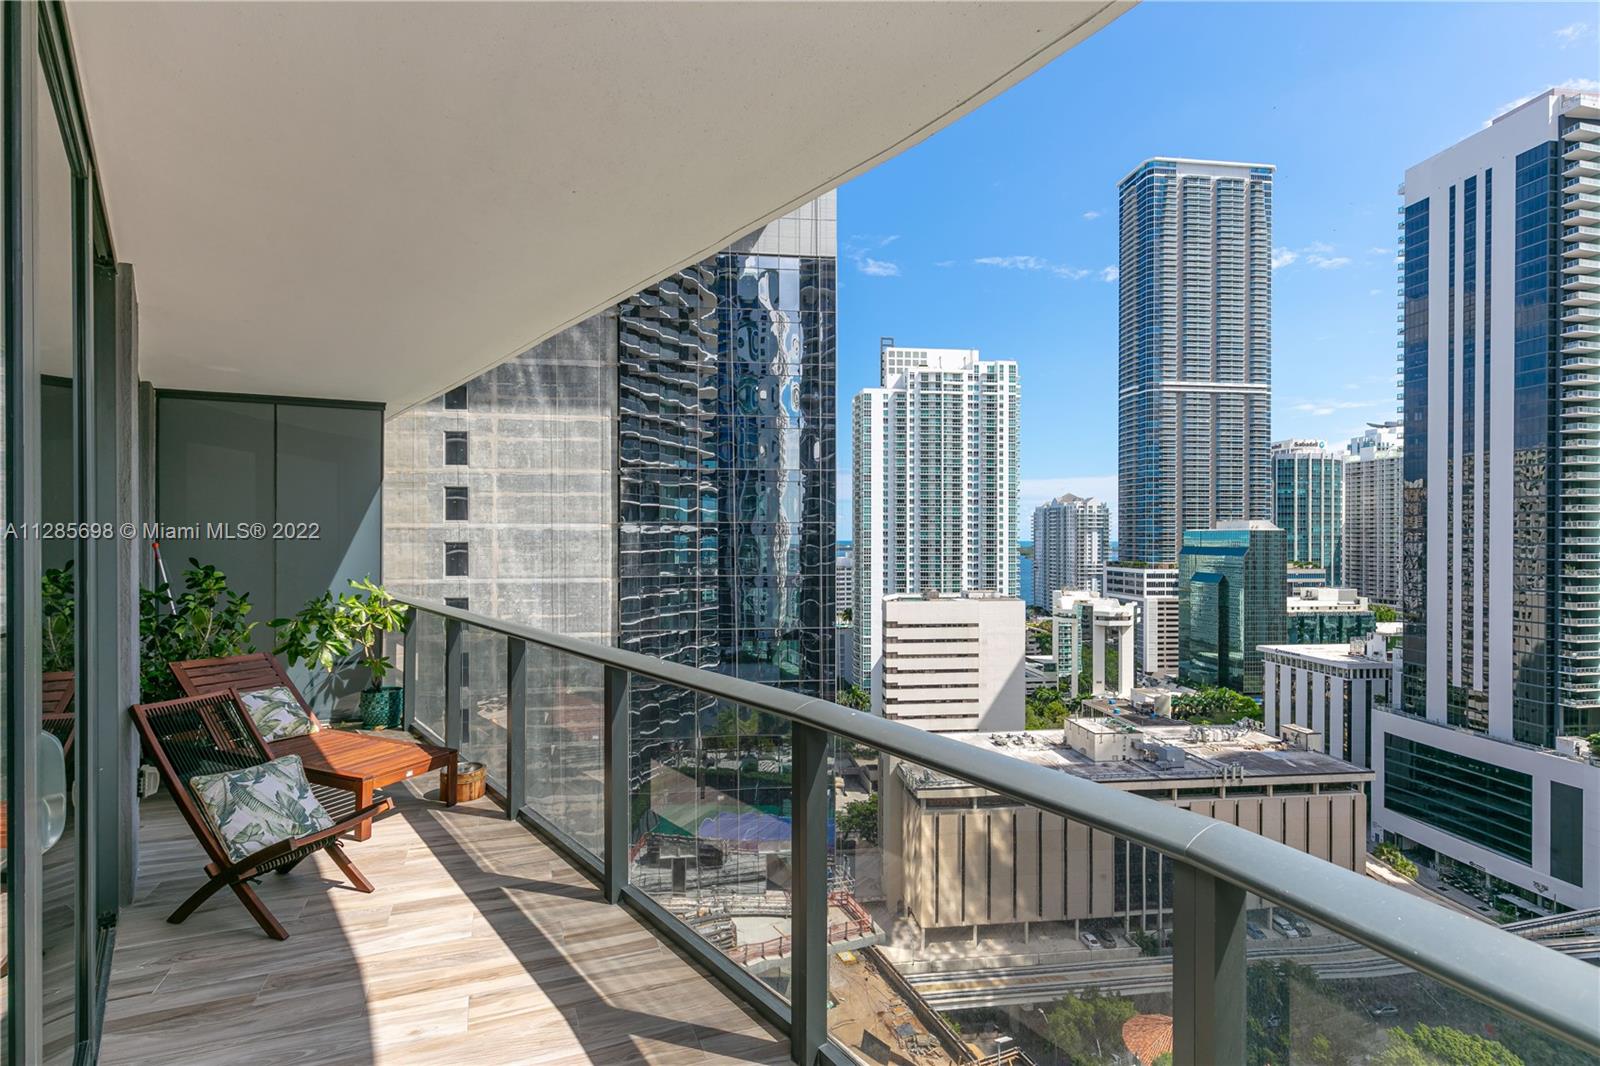 This 3bed + den and 4 full baths is a corner unit featuring Italian cabinets, top of the line appliances, and floor-to-ceiling glass windows leading to a spacious wrap around balcony. SLS Lux Brickell residents, in addition to having exquisite interior finishes, enjoy a host of amenities. The amenities at SLS Lux Brickell include three pools, two hot tubs, a poolside bar, BBQ area with summer kitchen, a lighted tennis court, a fitness center, a full-service spa, full-service concierge service, two club rooms, children’s playroom, and more.